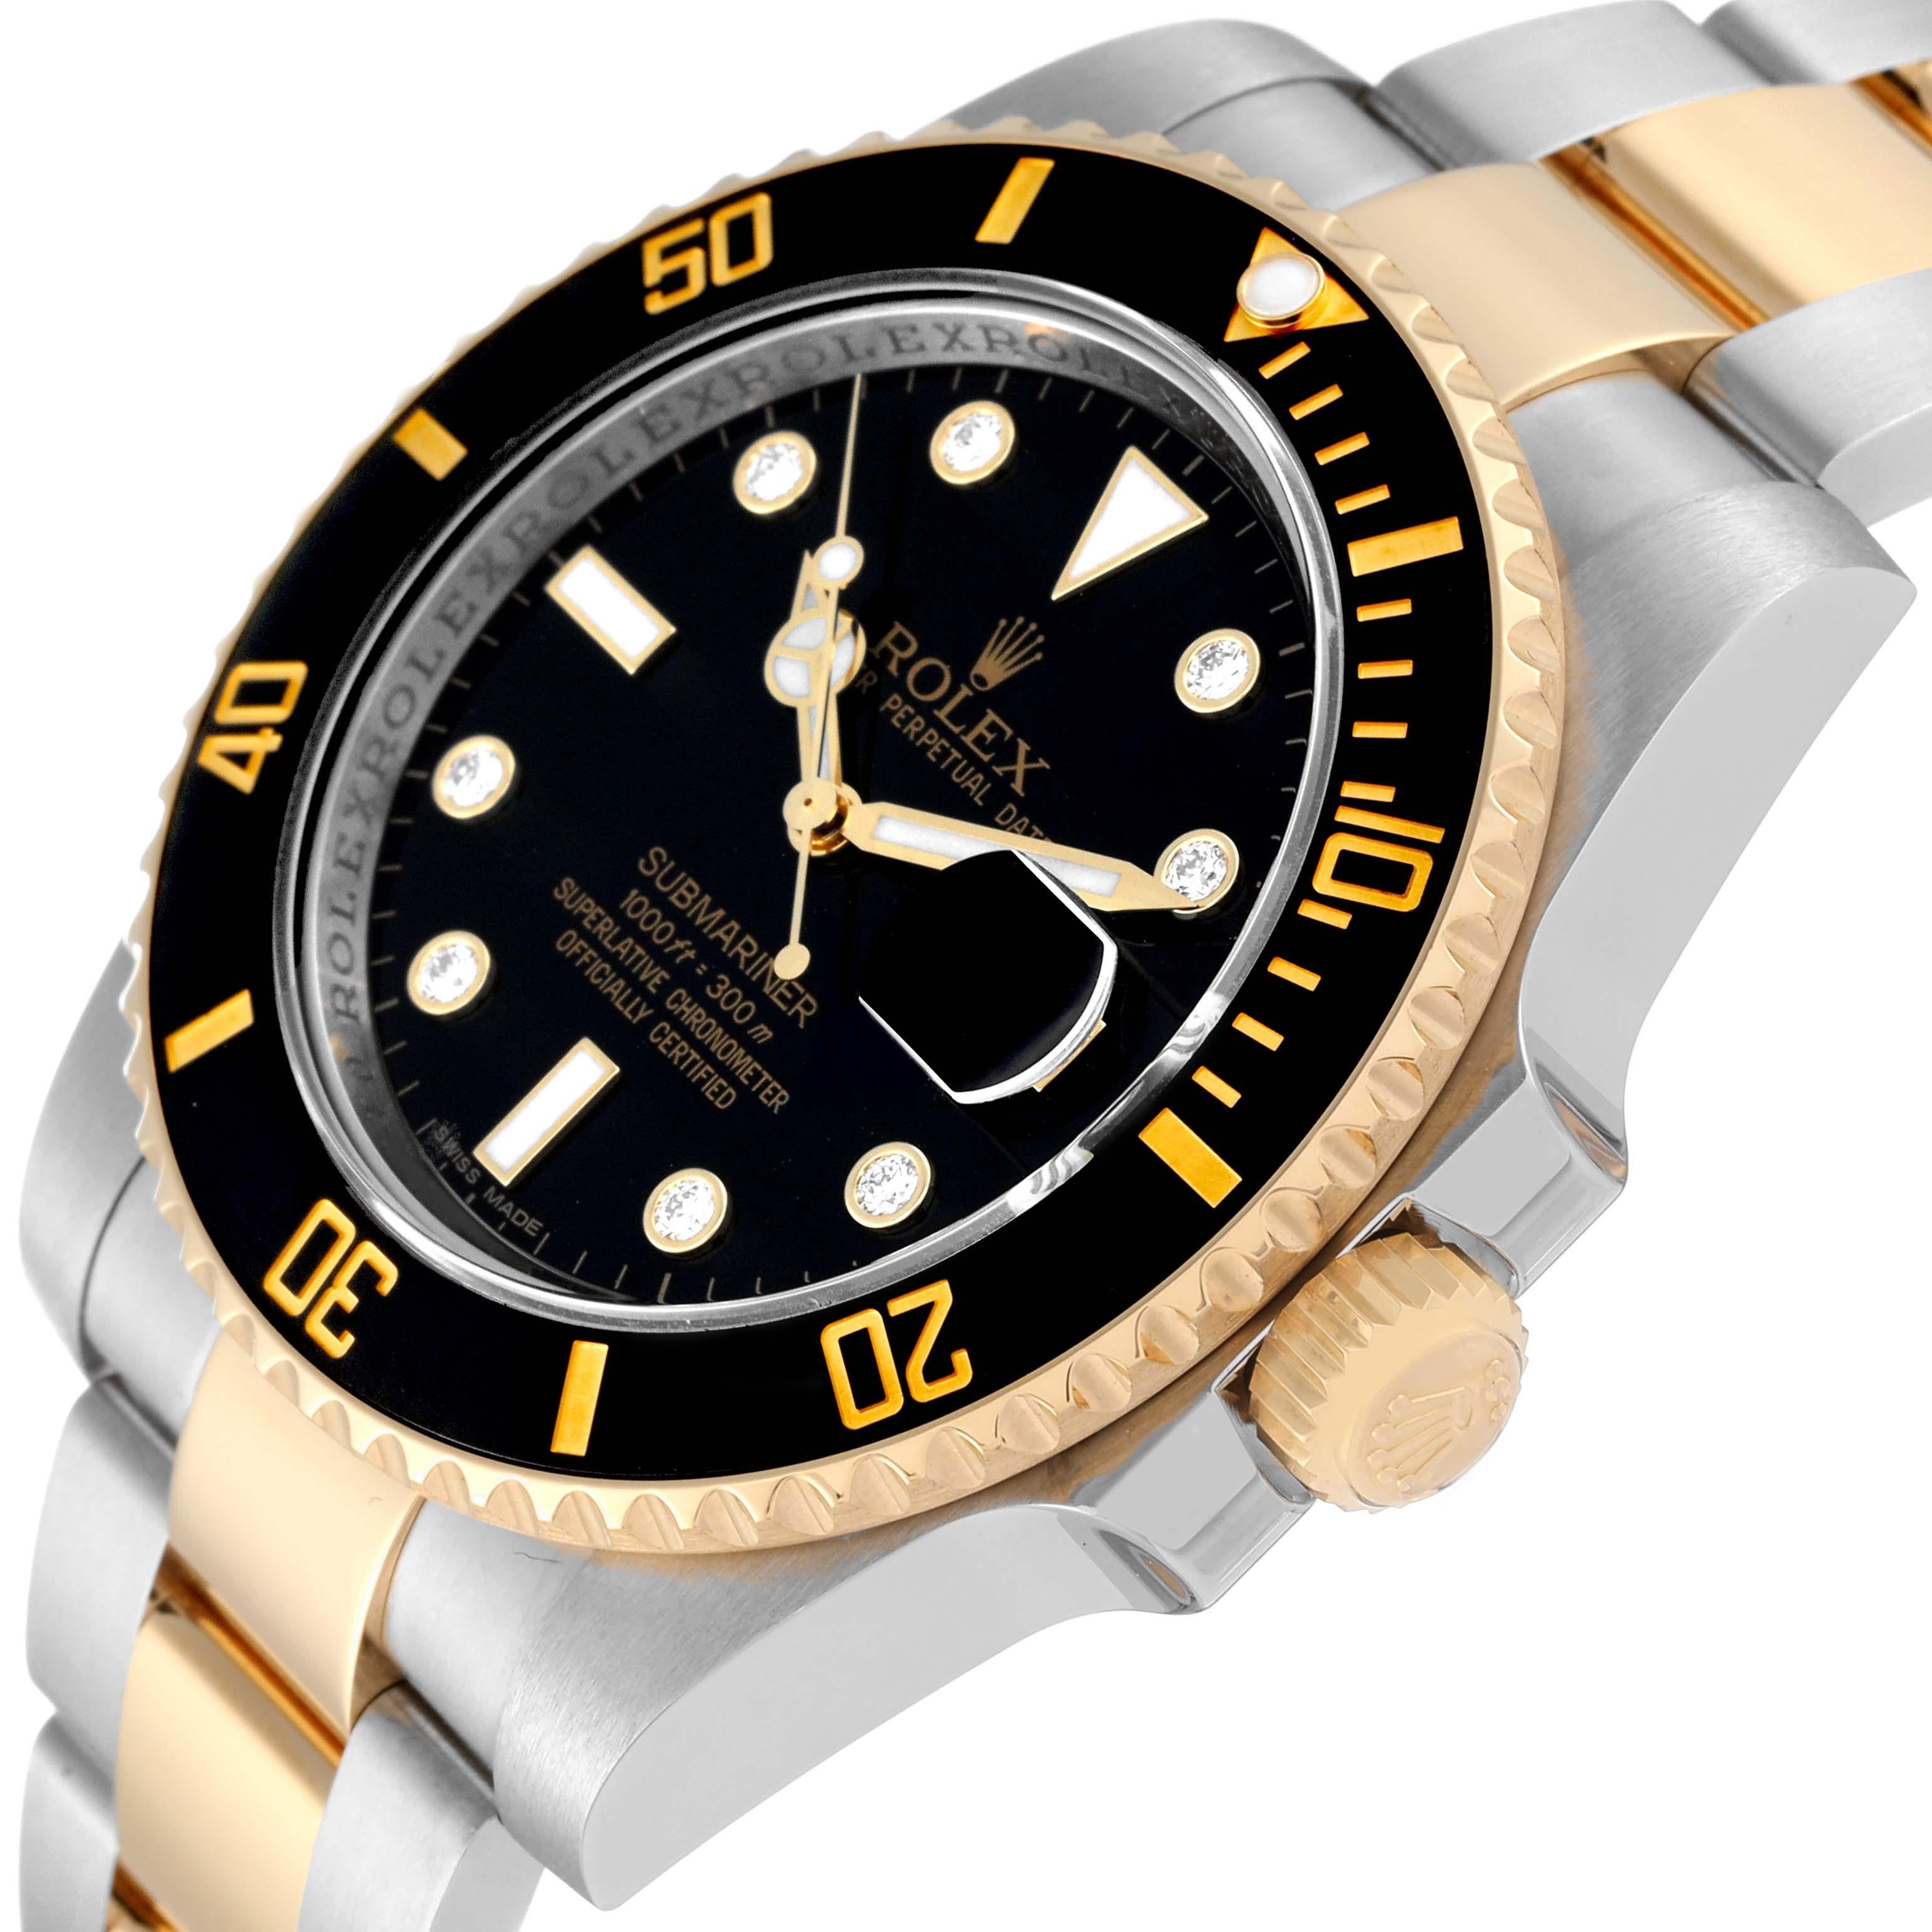 Rolex Submariner Steel Yellow Gold Black Diamond Dial Mens Watch 116613 Box Card For Sale 4